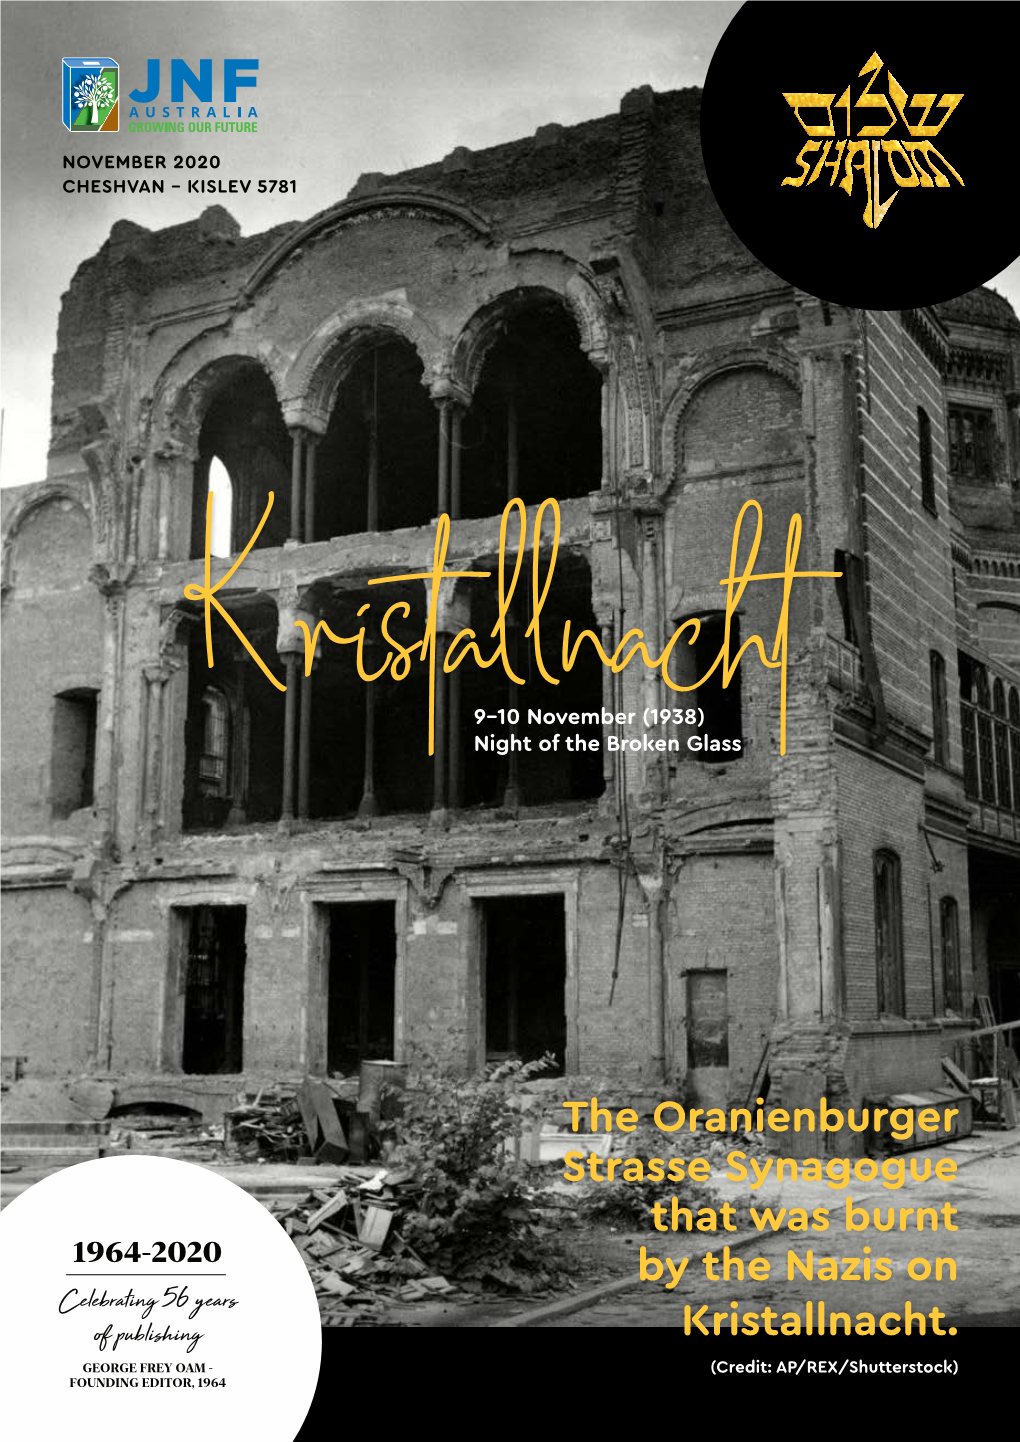 The Oranienburger Strasse Synagogue That Was Burnt by the Nazis on Kristallnacht